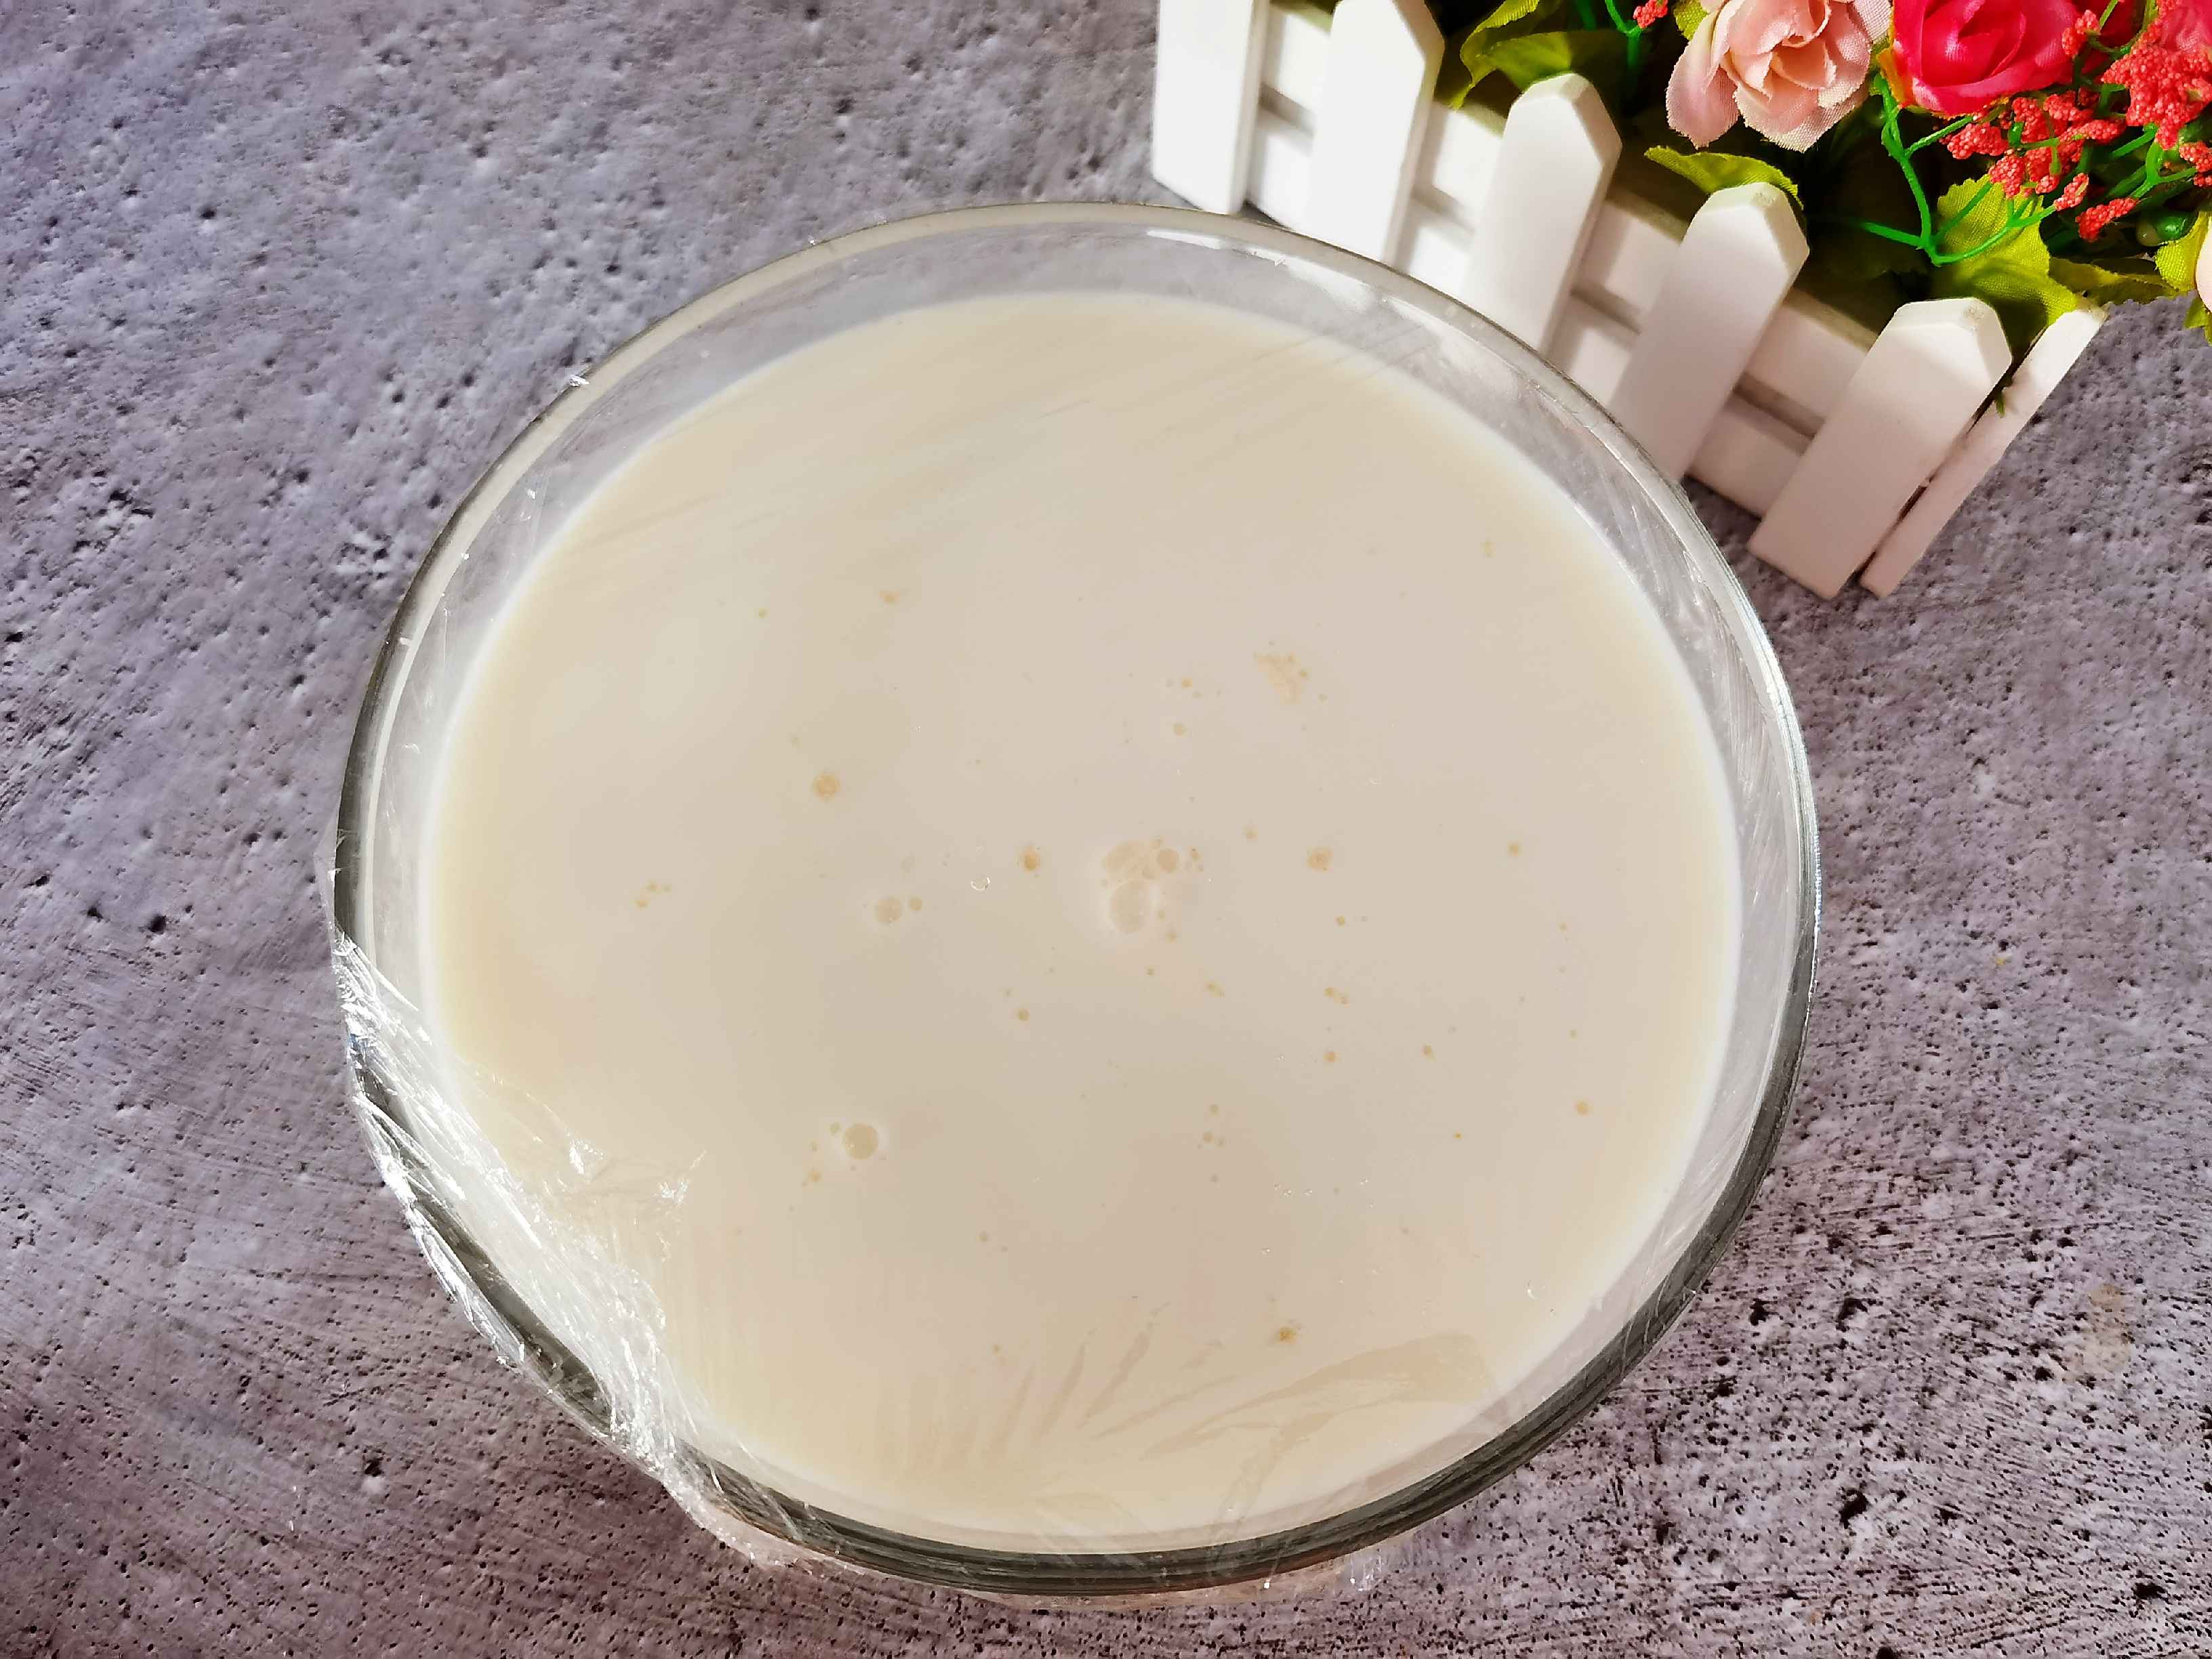 6 Yuan Milk Made into A Large Bowl of Flavored Yogurt, Affordable and Delicious recipe